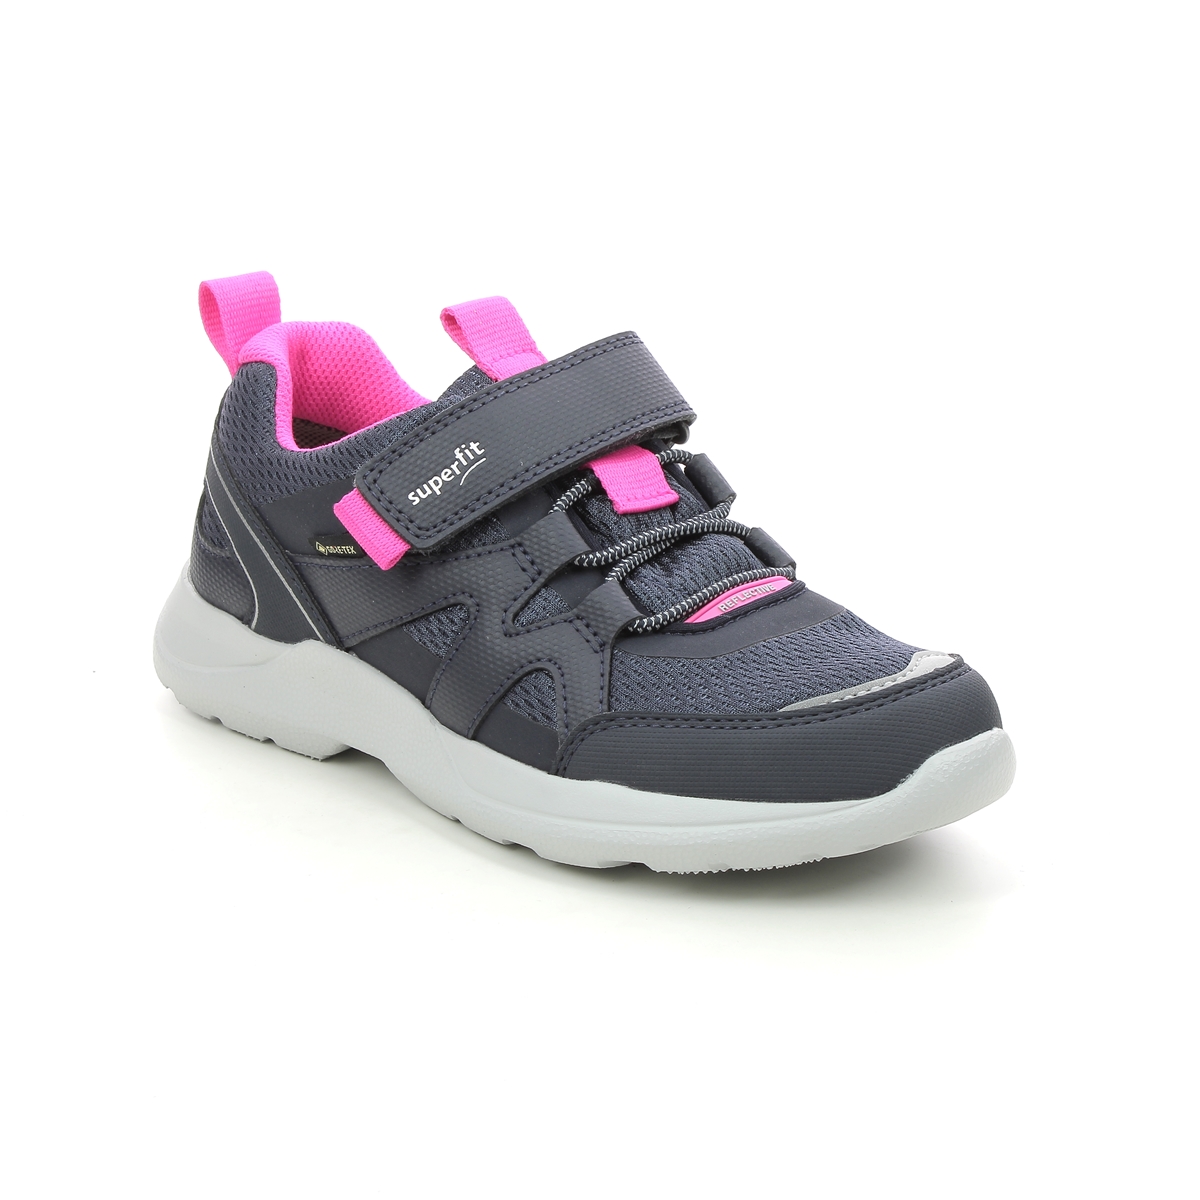 Superfit Rush Jnr G Gtx Navy Pink Kids Girls Trainers 1006219-8020 In Size 35 In Plain Navy Pink For kids